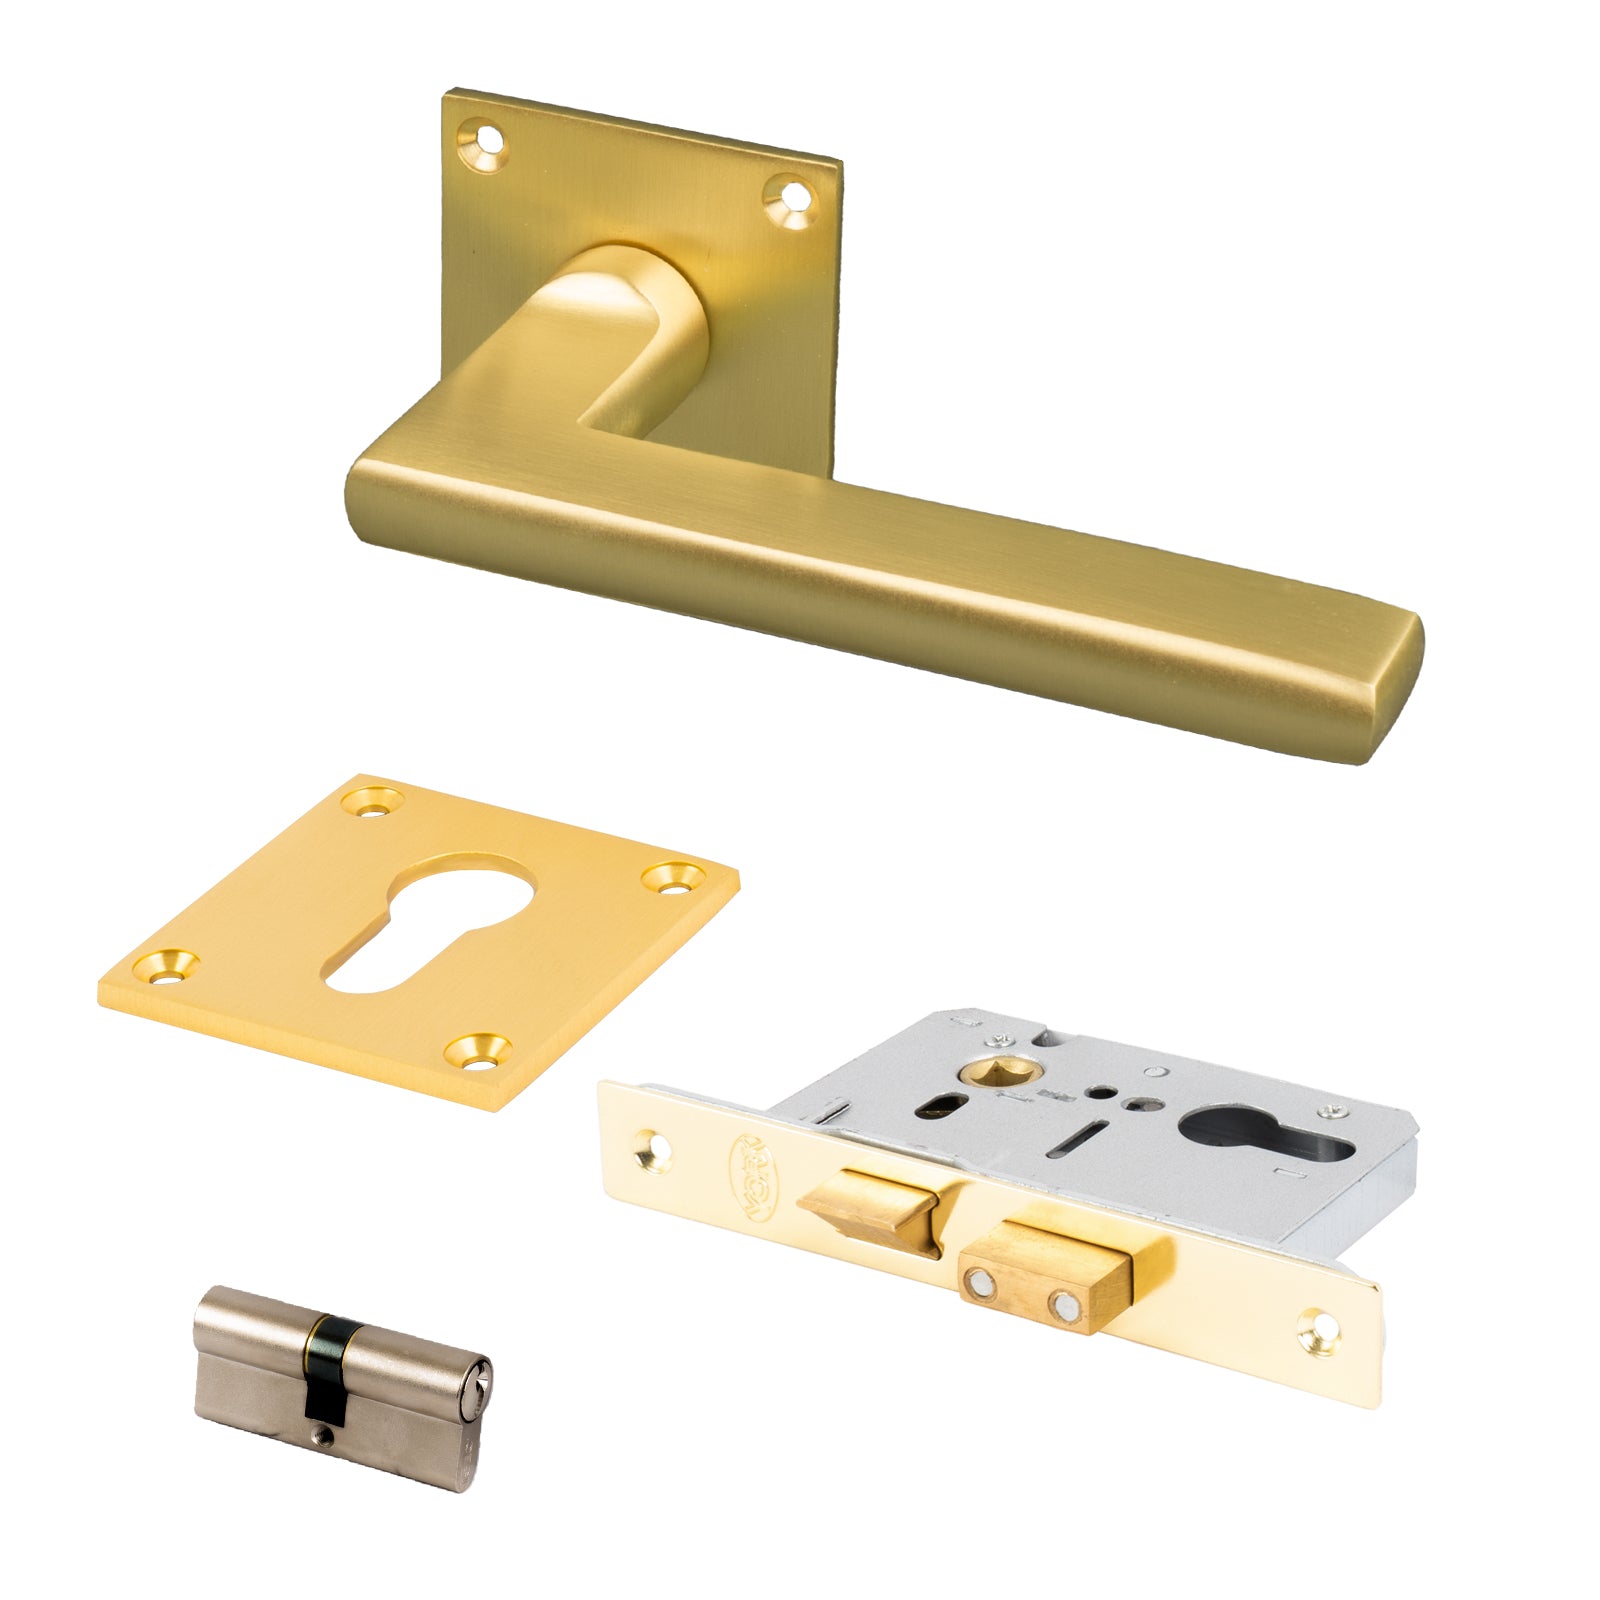 SHOW Trident Square Rose Door Handles Euro Set with Satin Brass finish